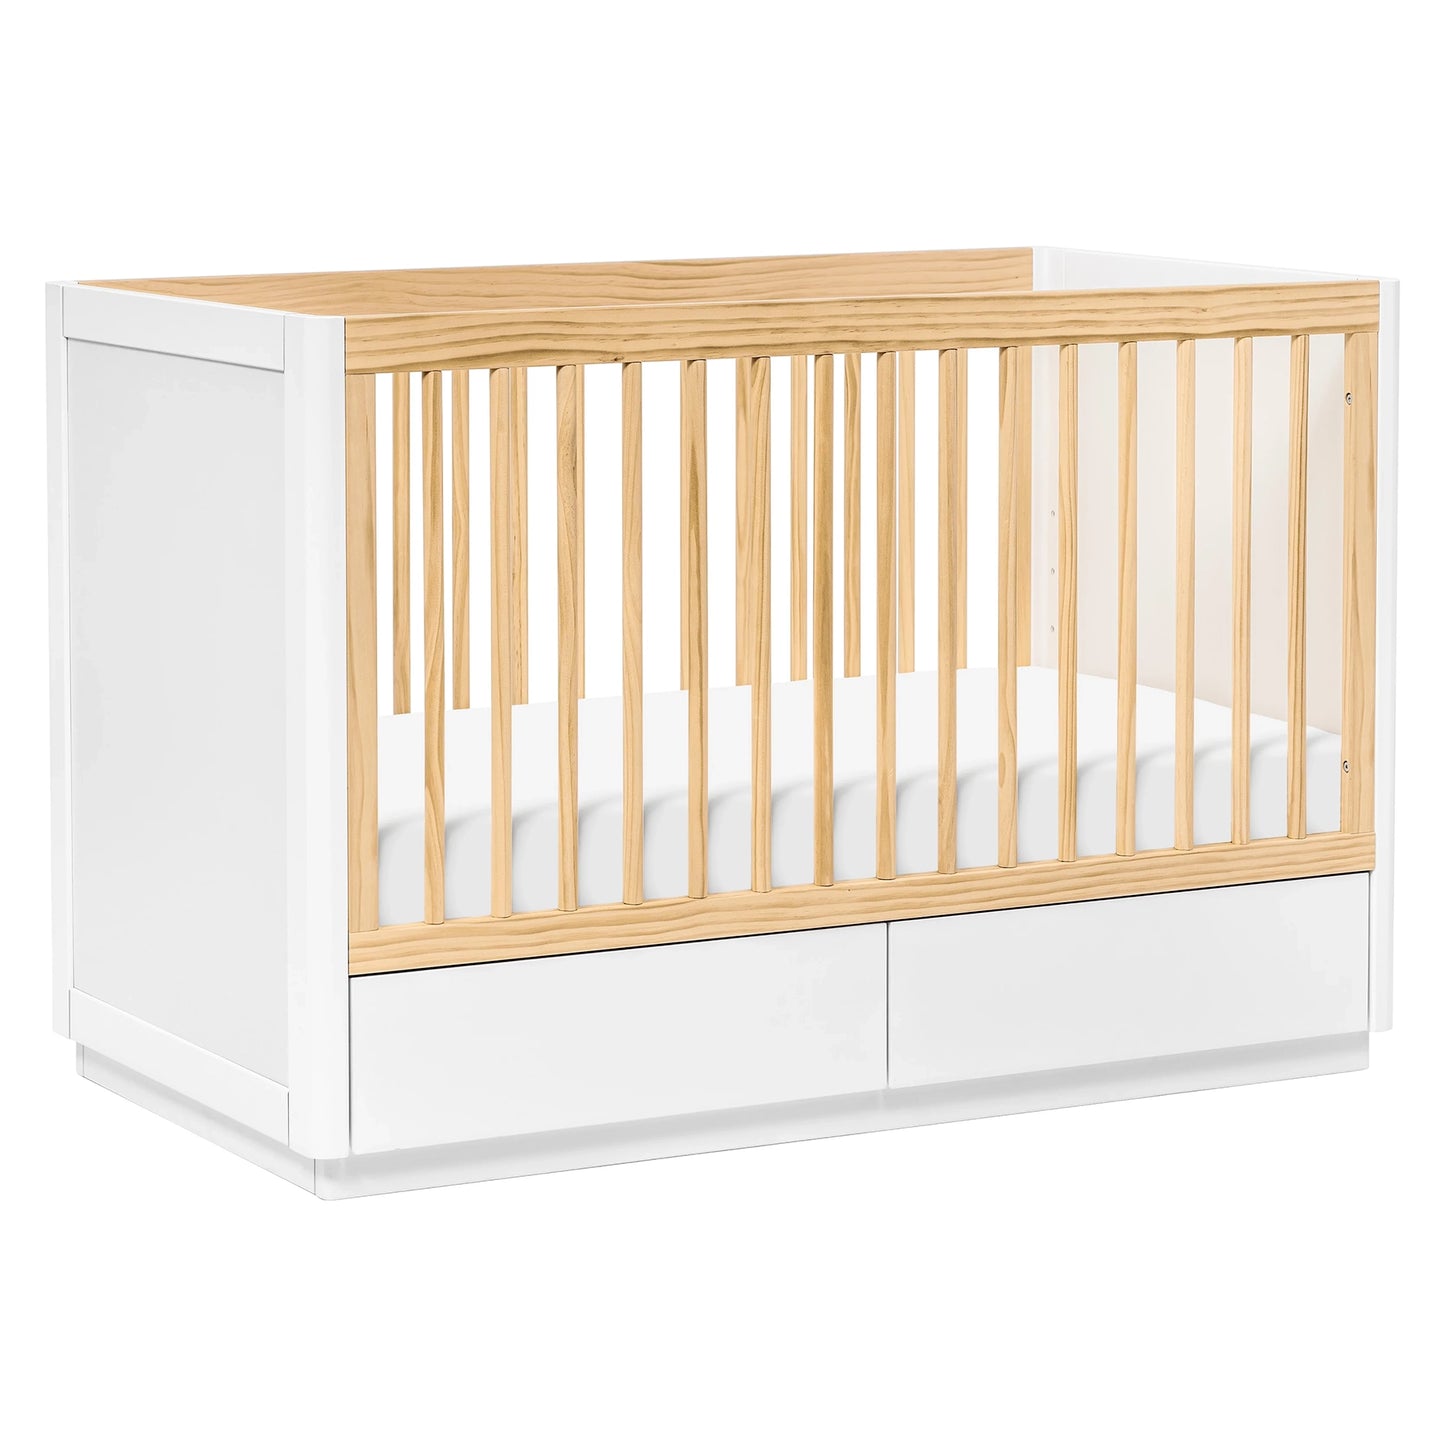 Babyletto Bento 3-in-1 Convertible Storage Crib with Toddler Bed Conversion Kit - white/natural